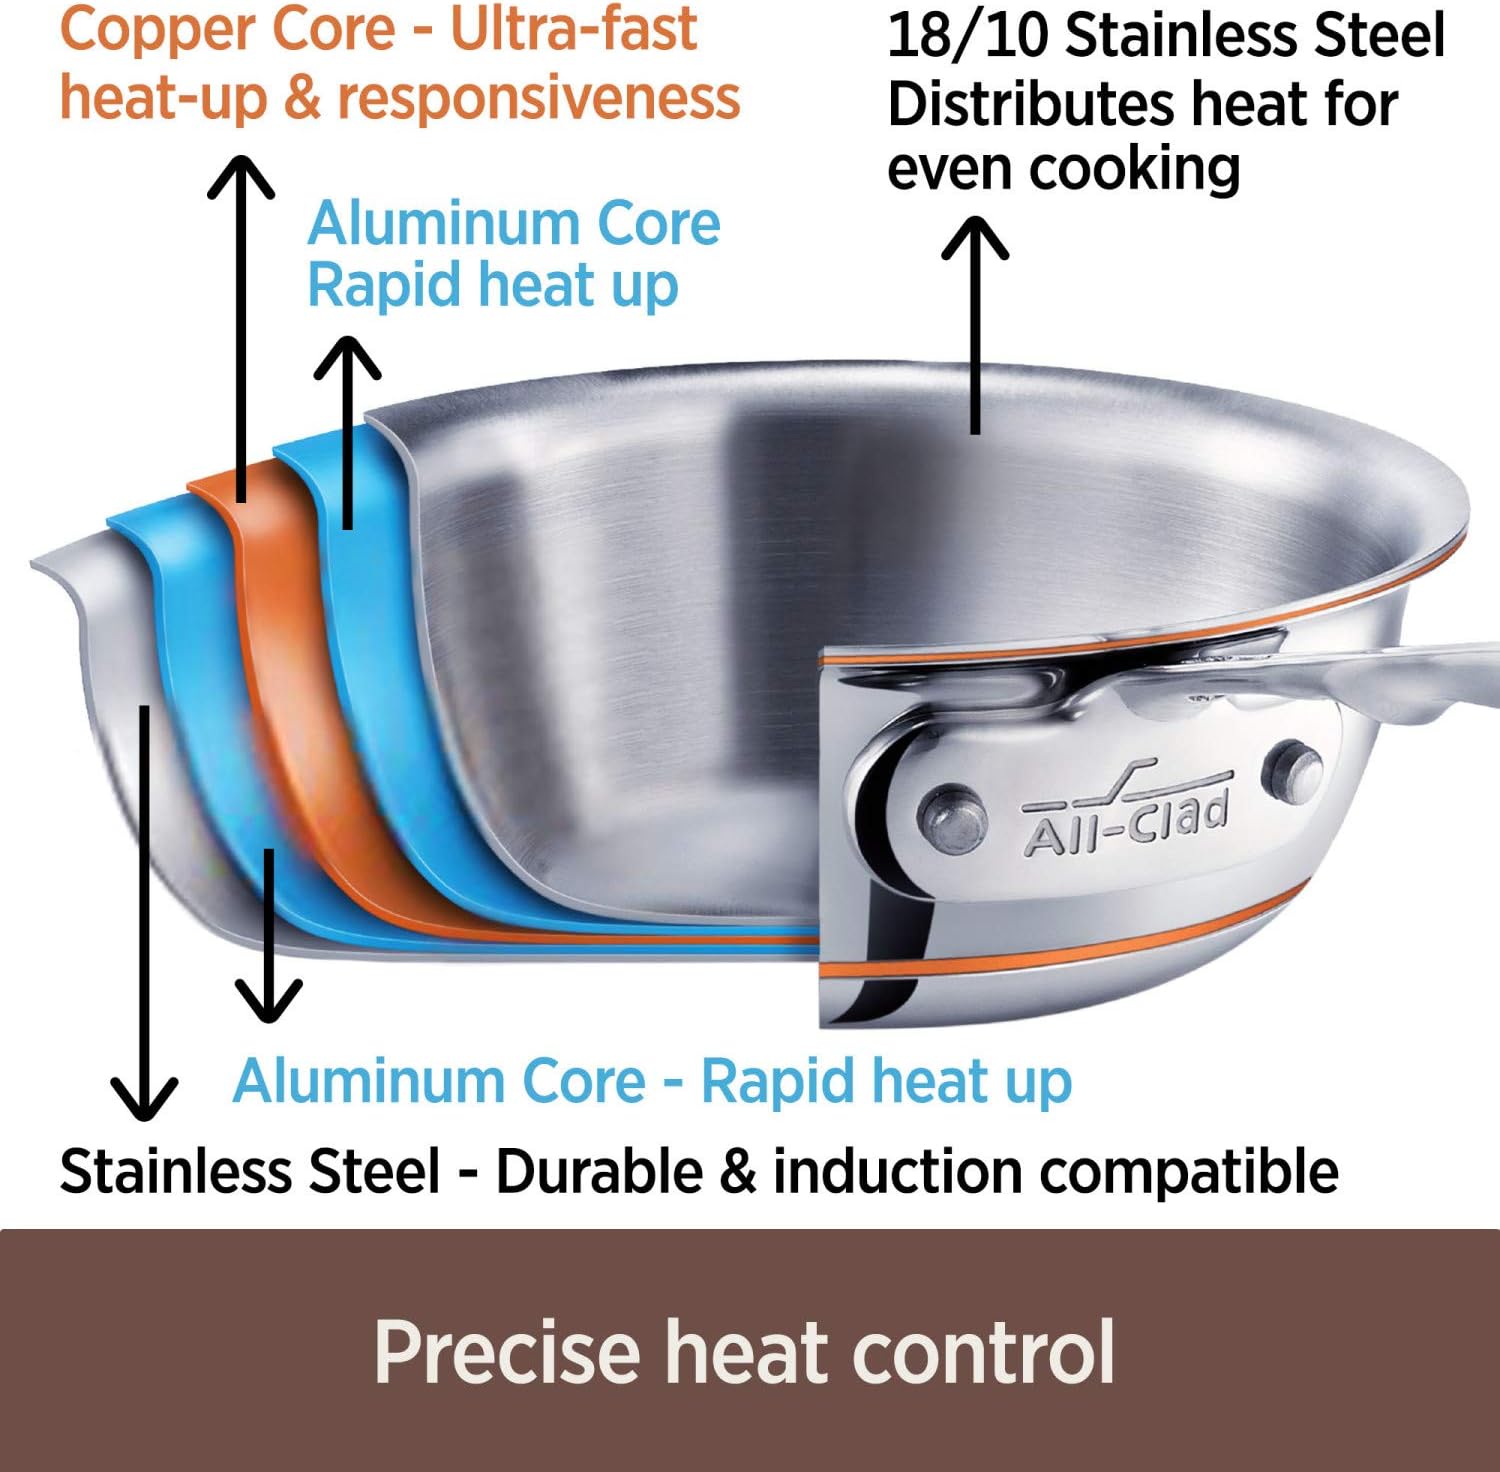 All-Clad Stainless 8-Inch Fry Pan